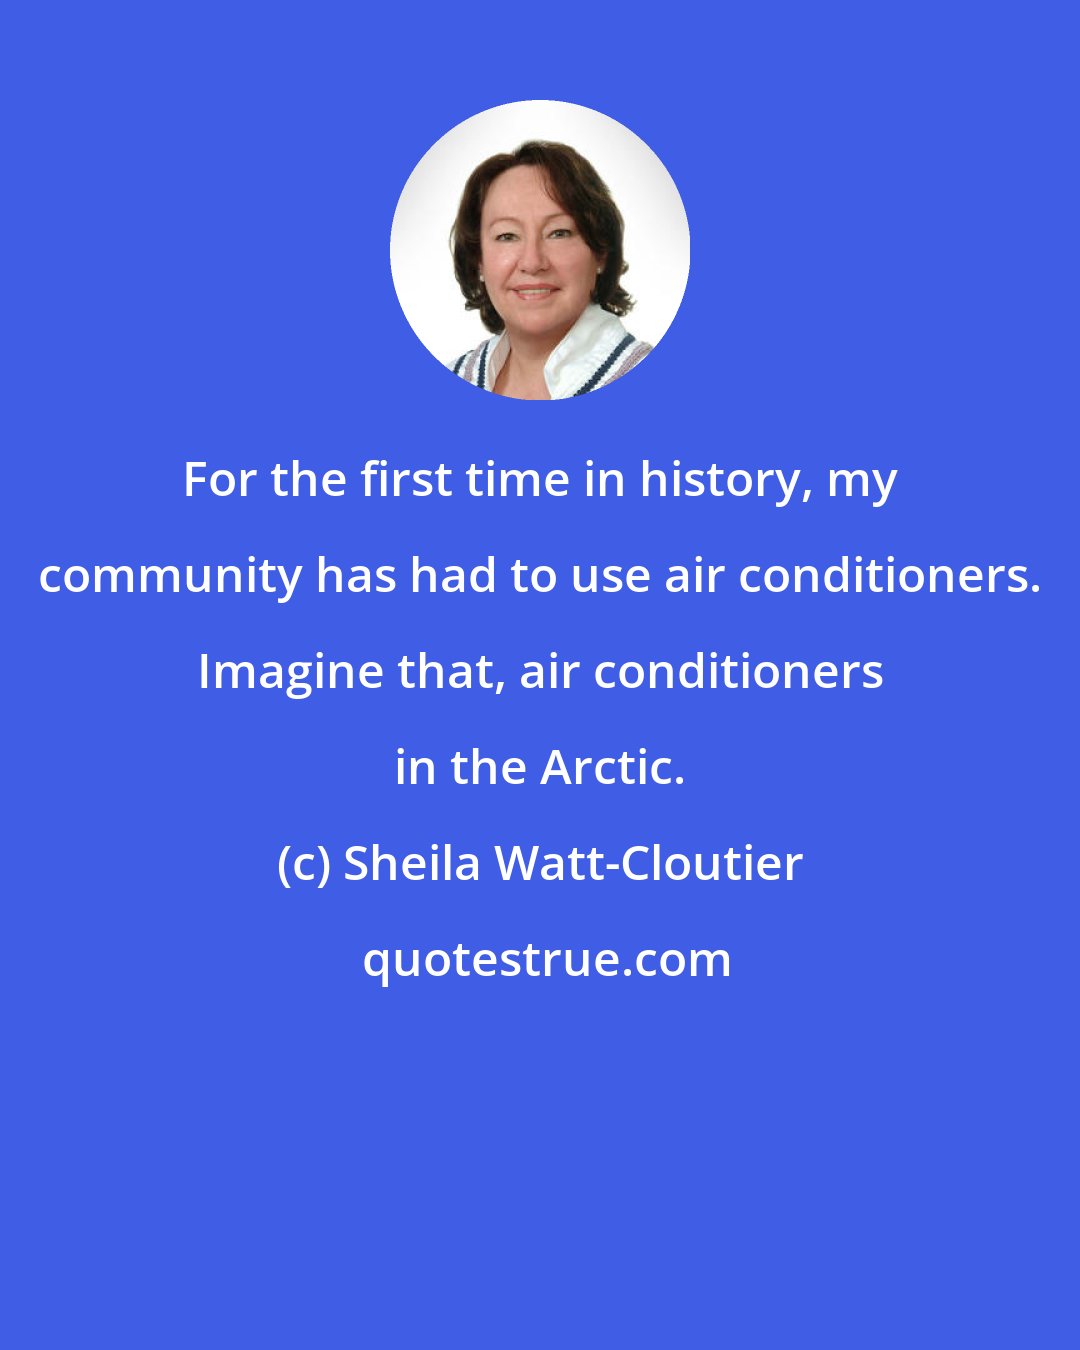 Sheila Watt-Cloutier: For the first time in history, my community has had to use air conditioners. Imagine that, air conditioners in the Arctic.